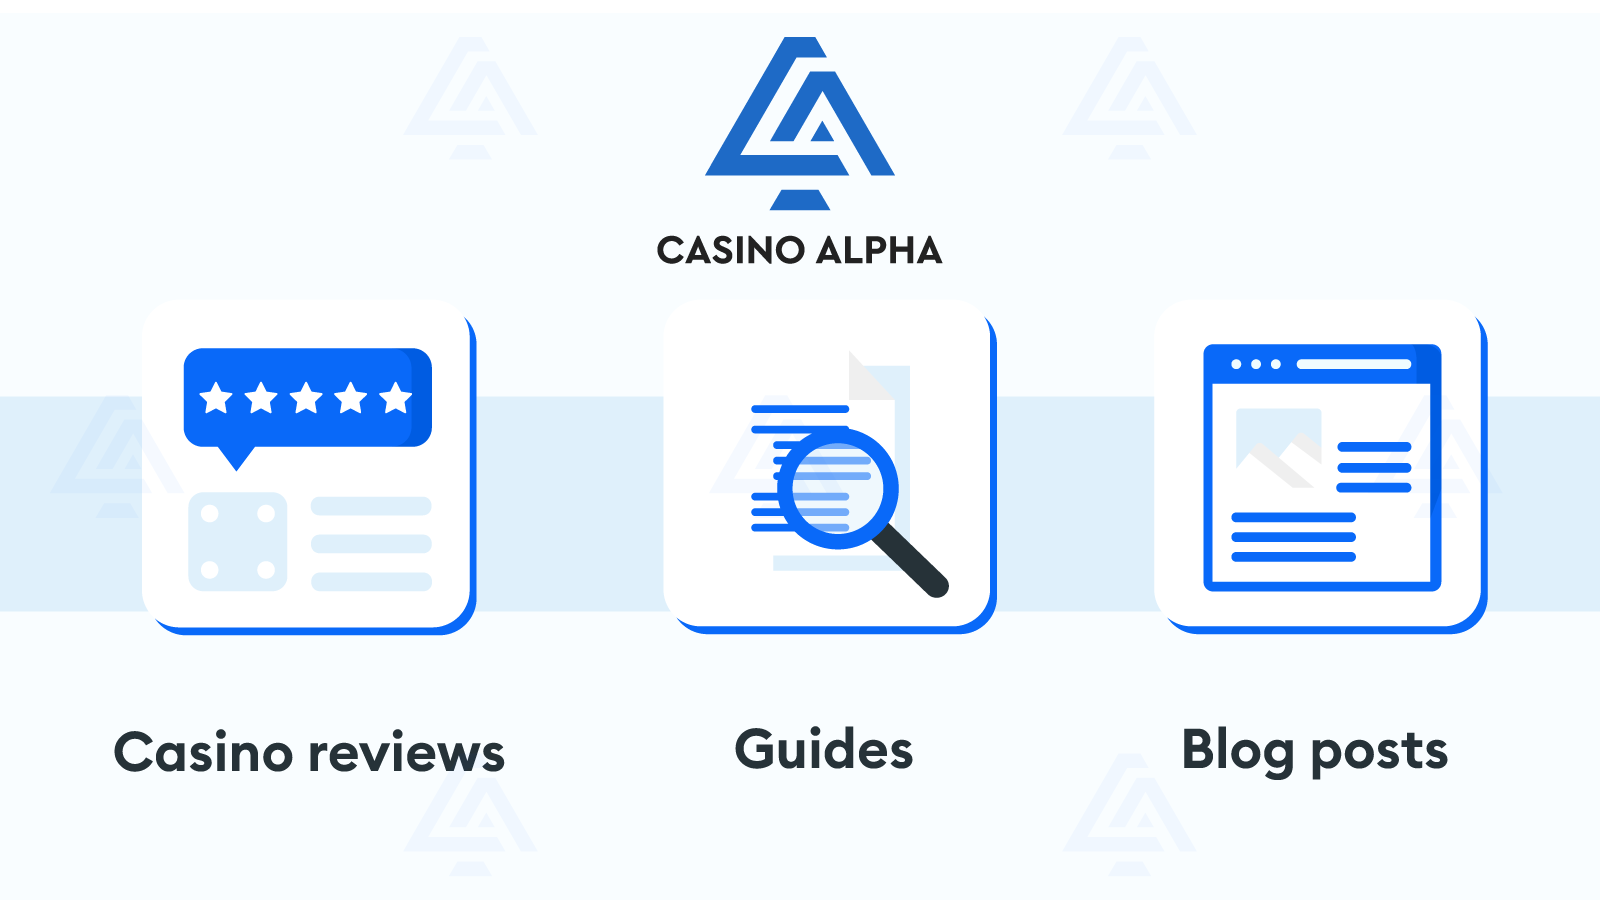 And-the-CasinoAlpha-team-is-here-to-be-your-faithful-guide